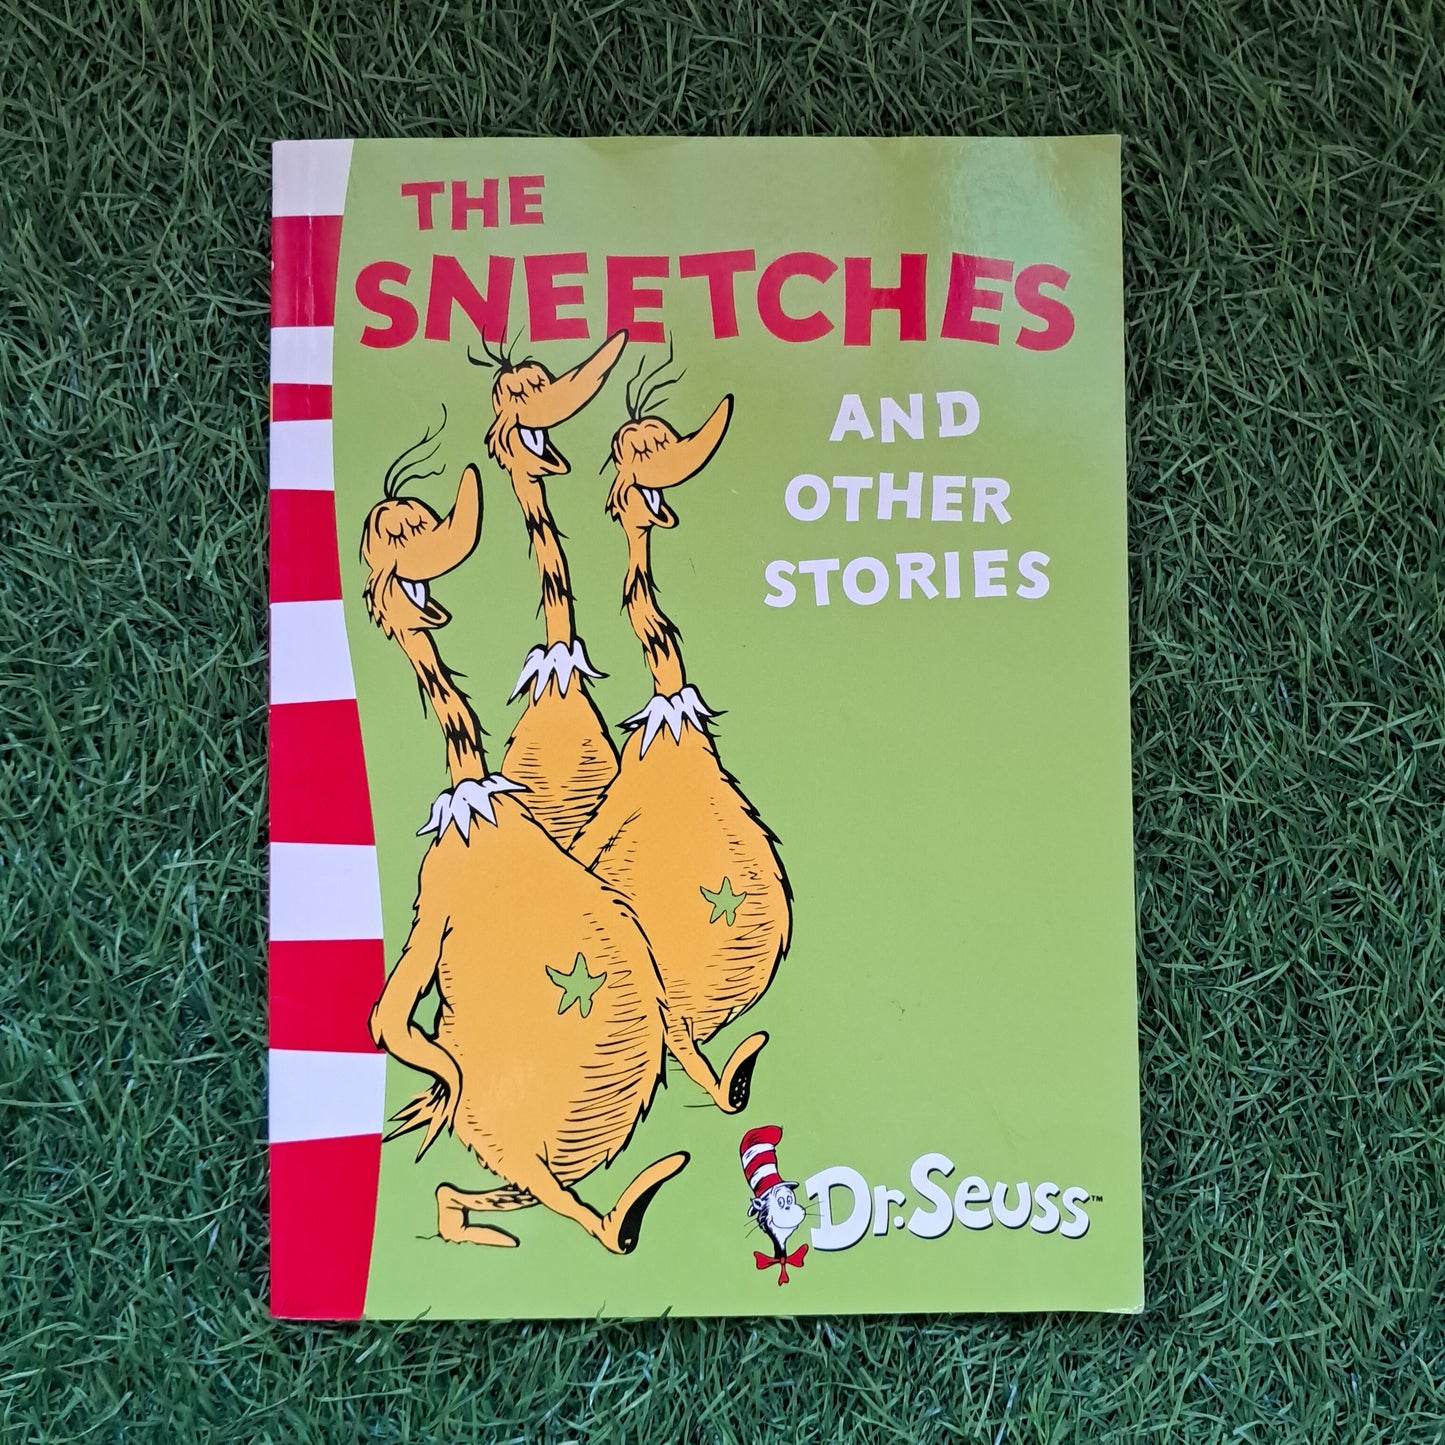 The Sneetches and other stories